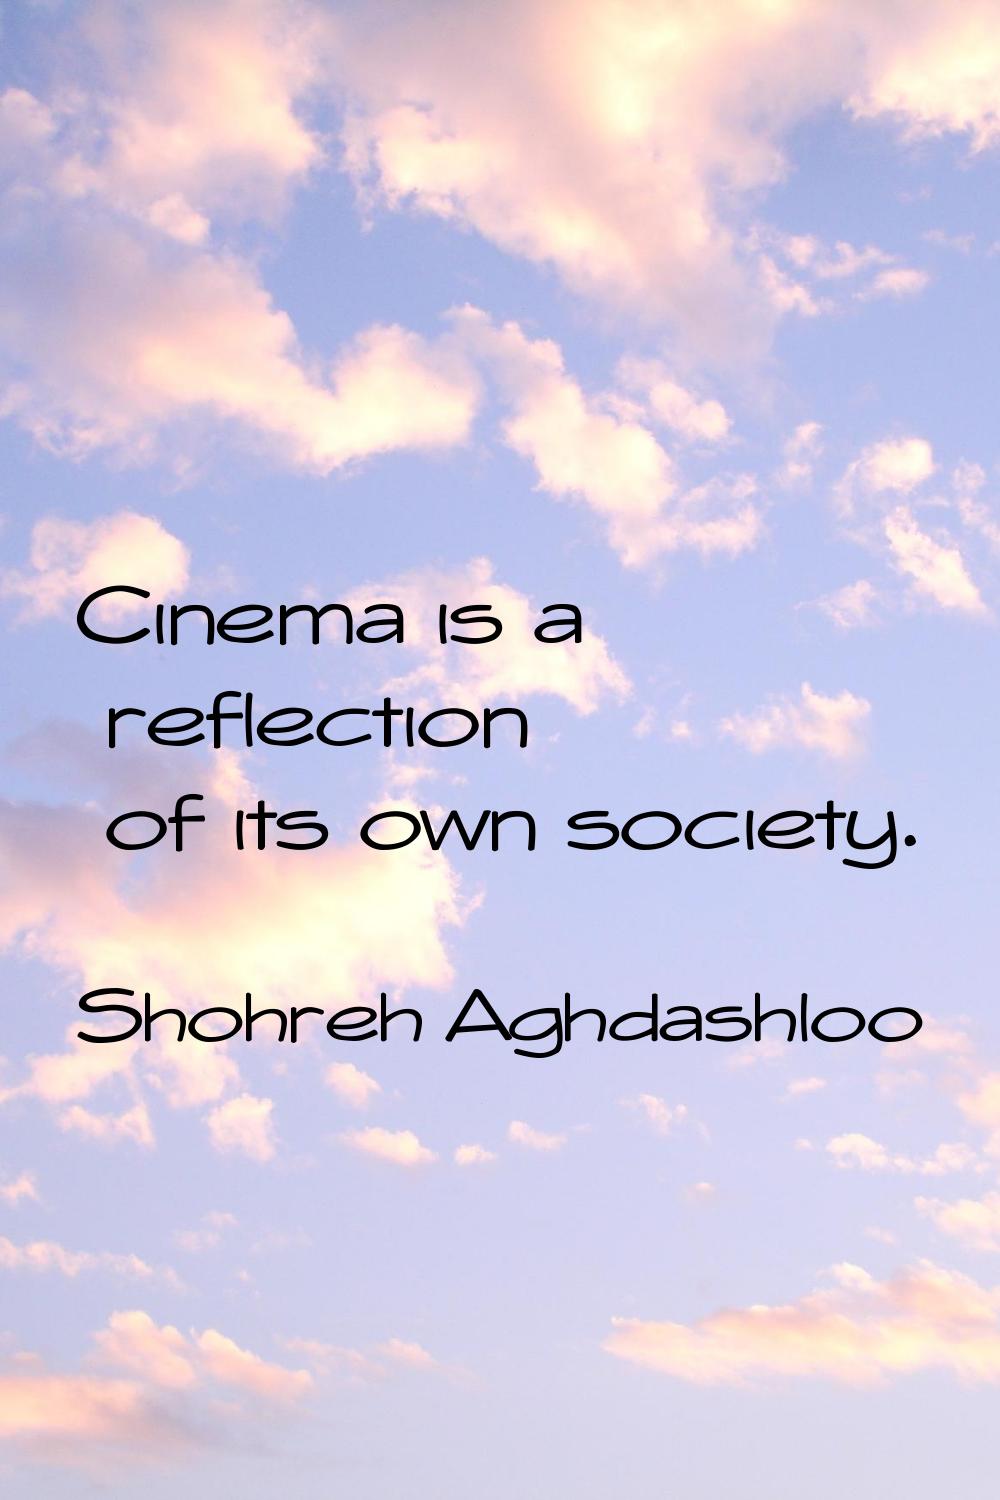 Cinema is a reflection of its own society.